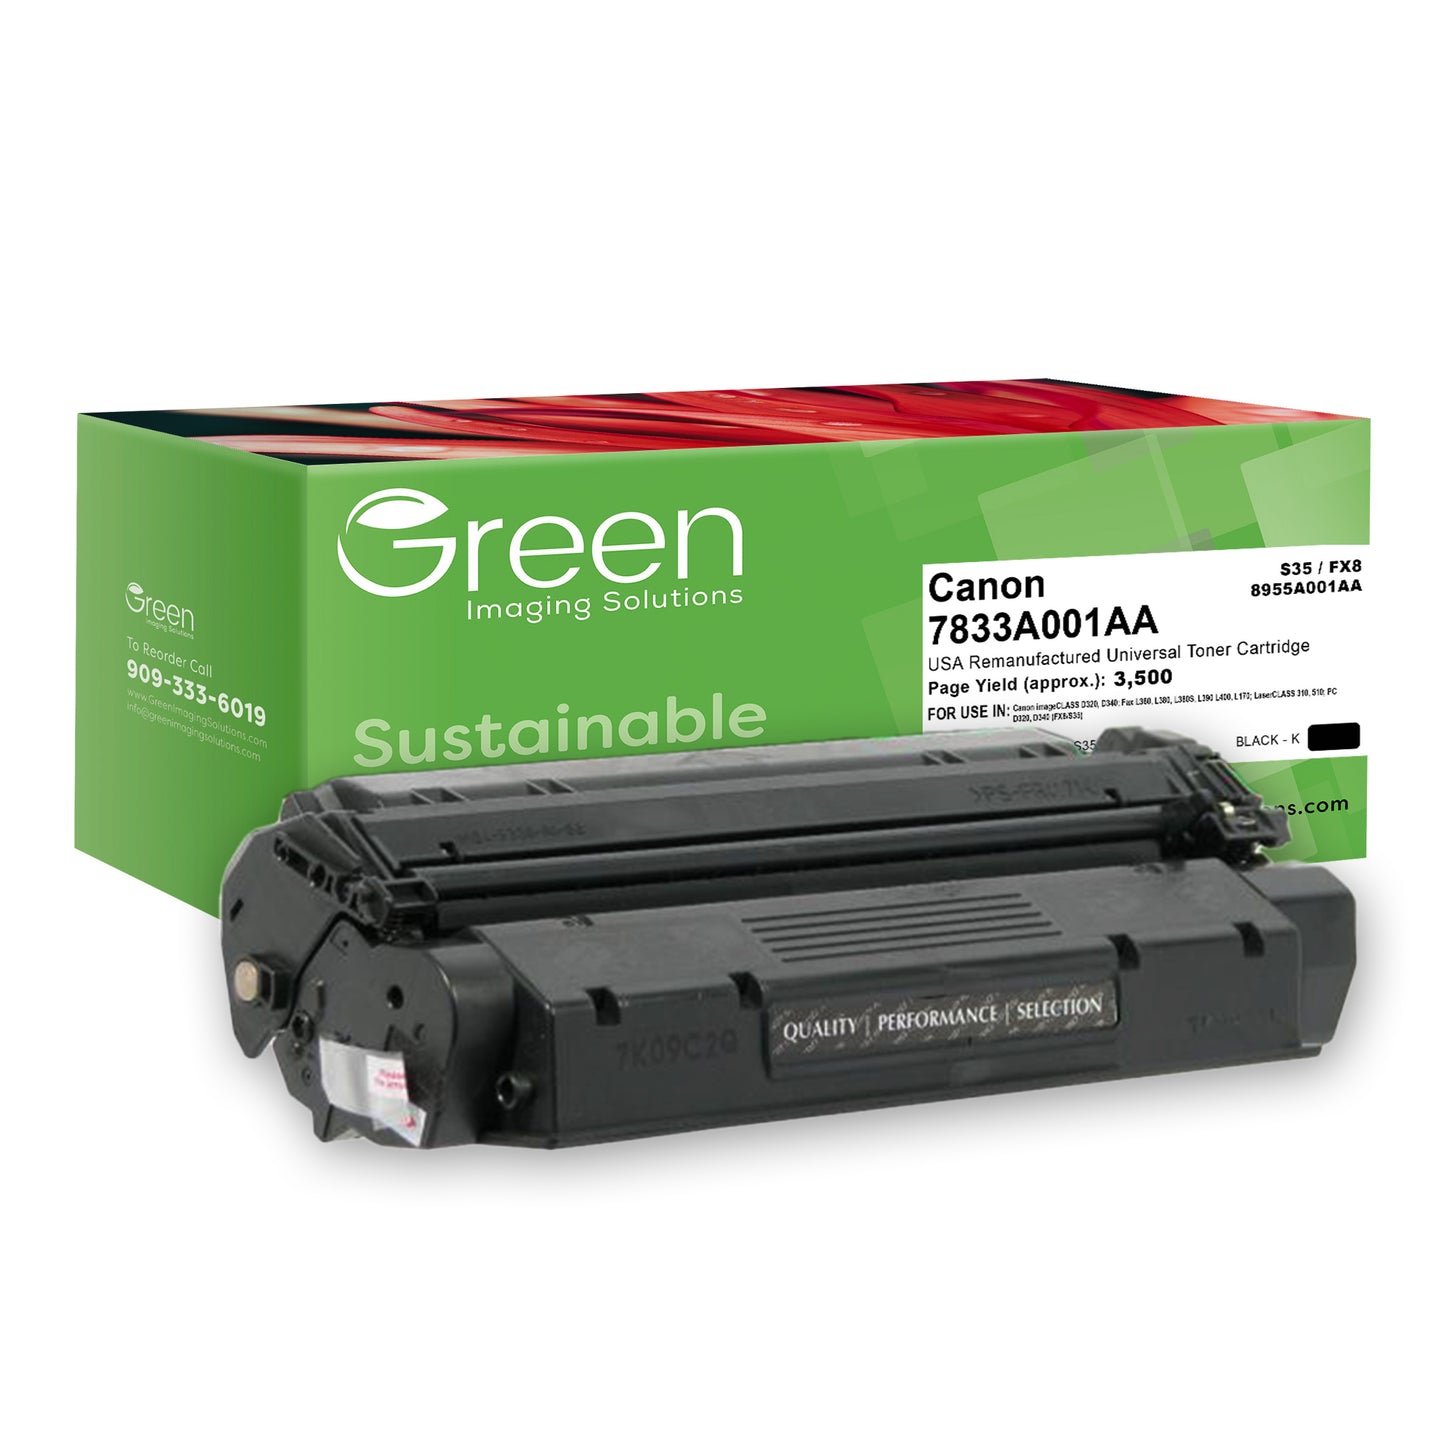 Green Imaging Solutions USA Remanufactured Universal Toner Cartridge for Canon 7833A001AA/8955A001AA (S35/FX8)